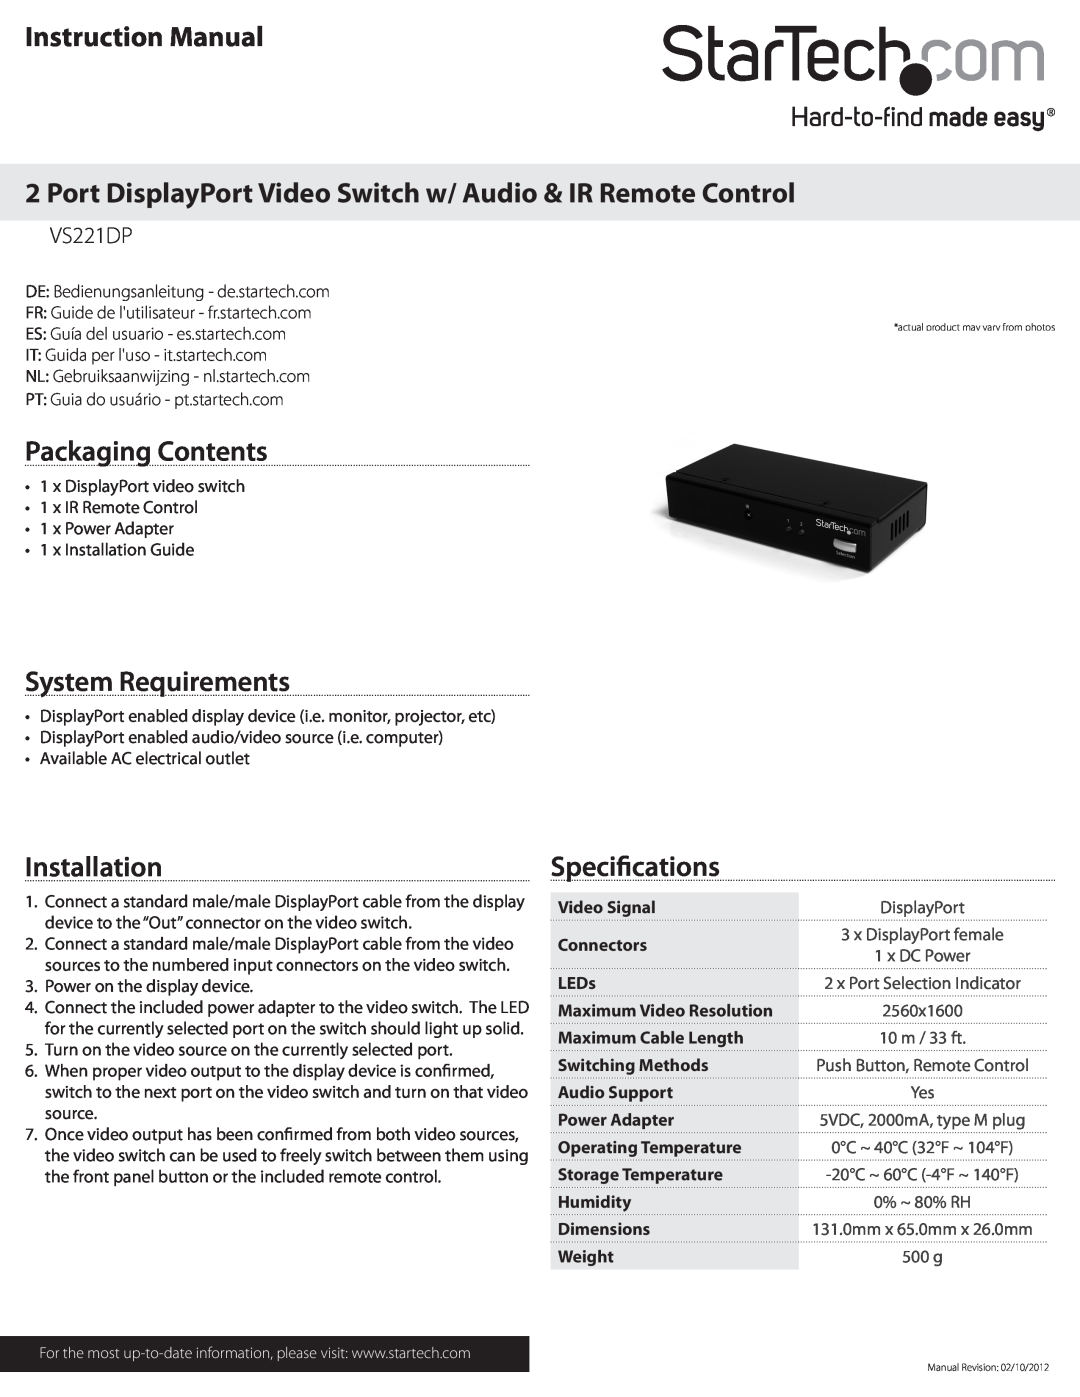 StarTech.com VS221DP instruction manual Packaging Contents, System Requirements, Installation, Specifications 